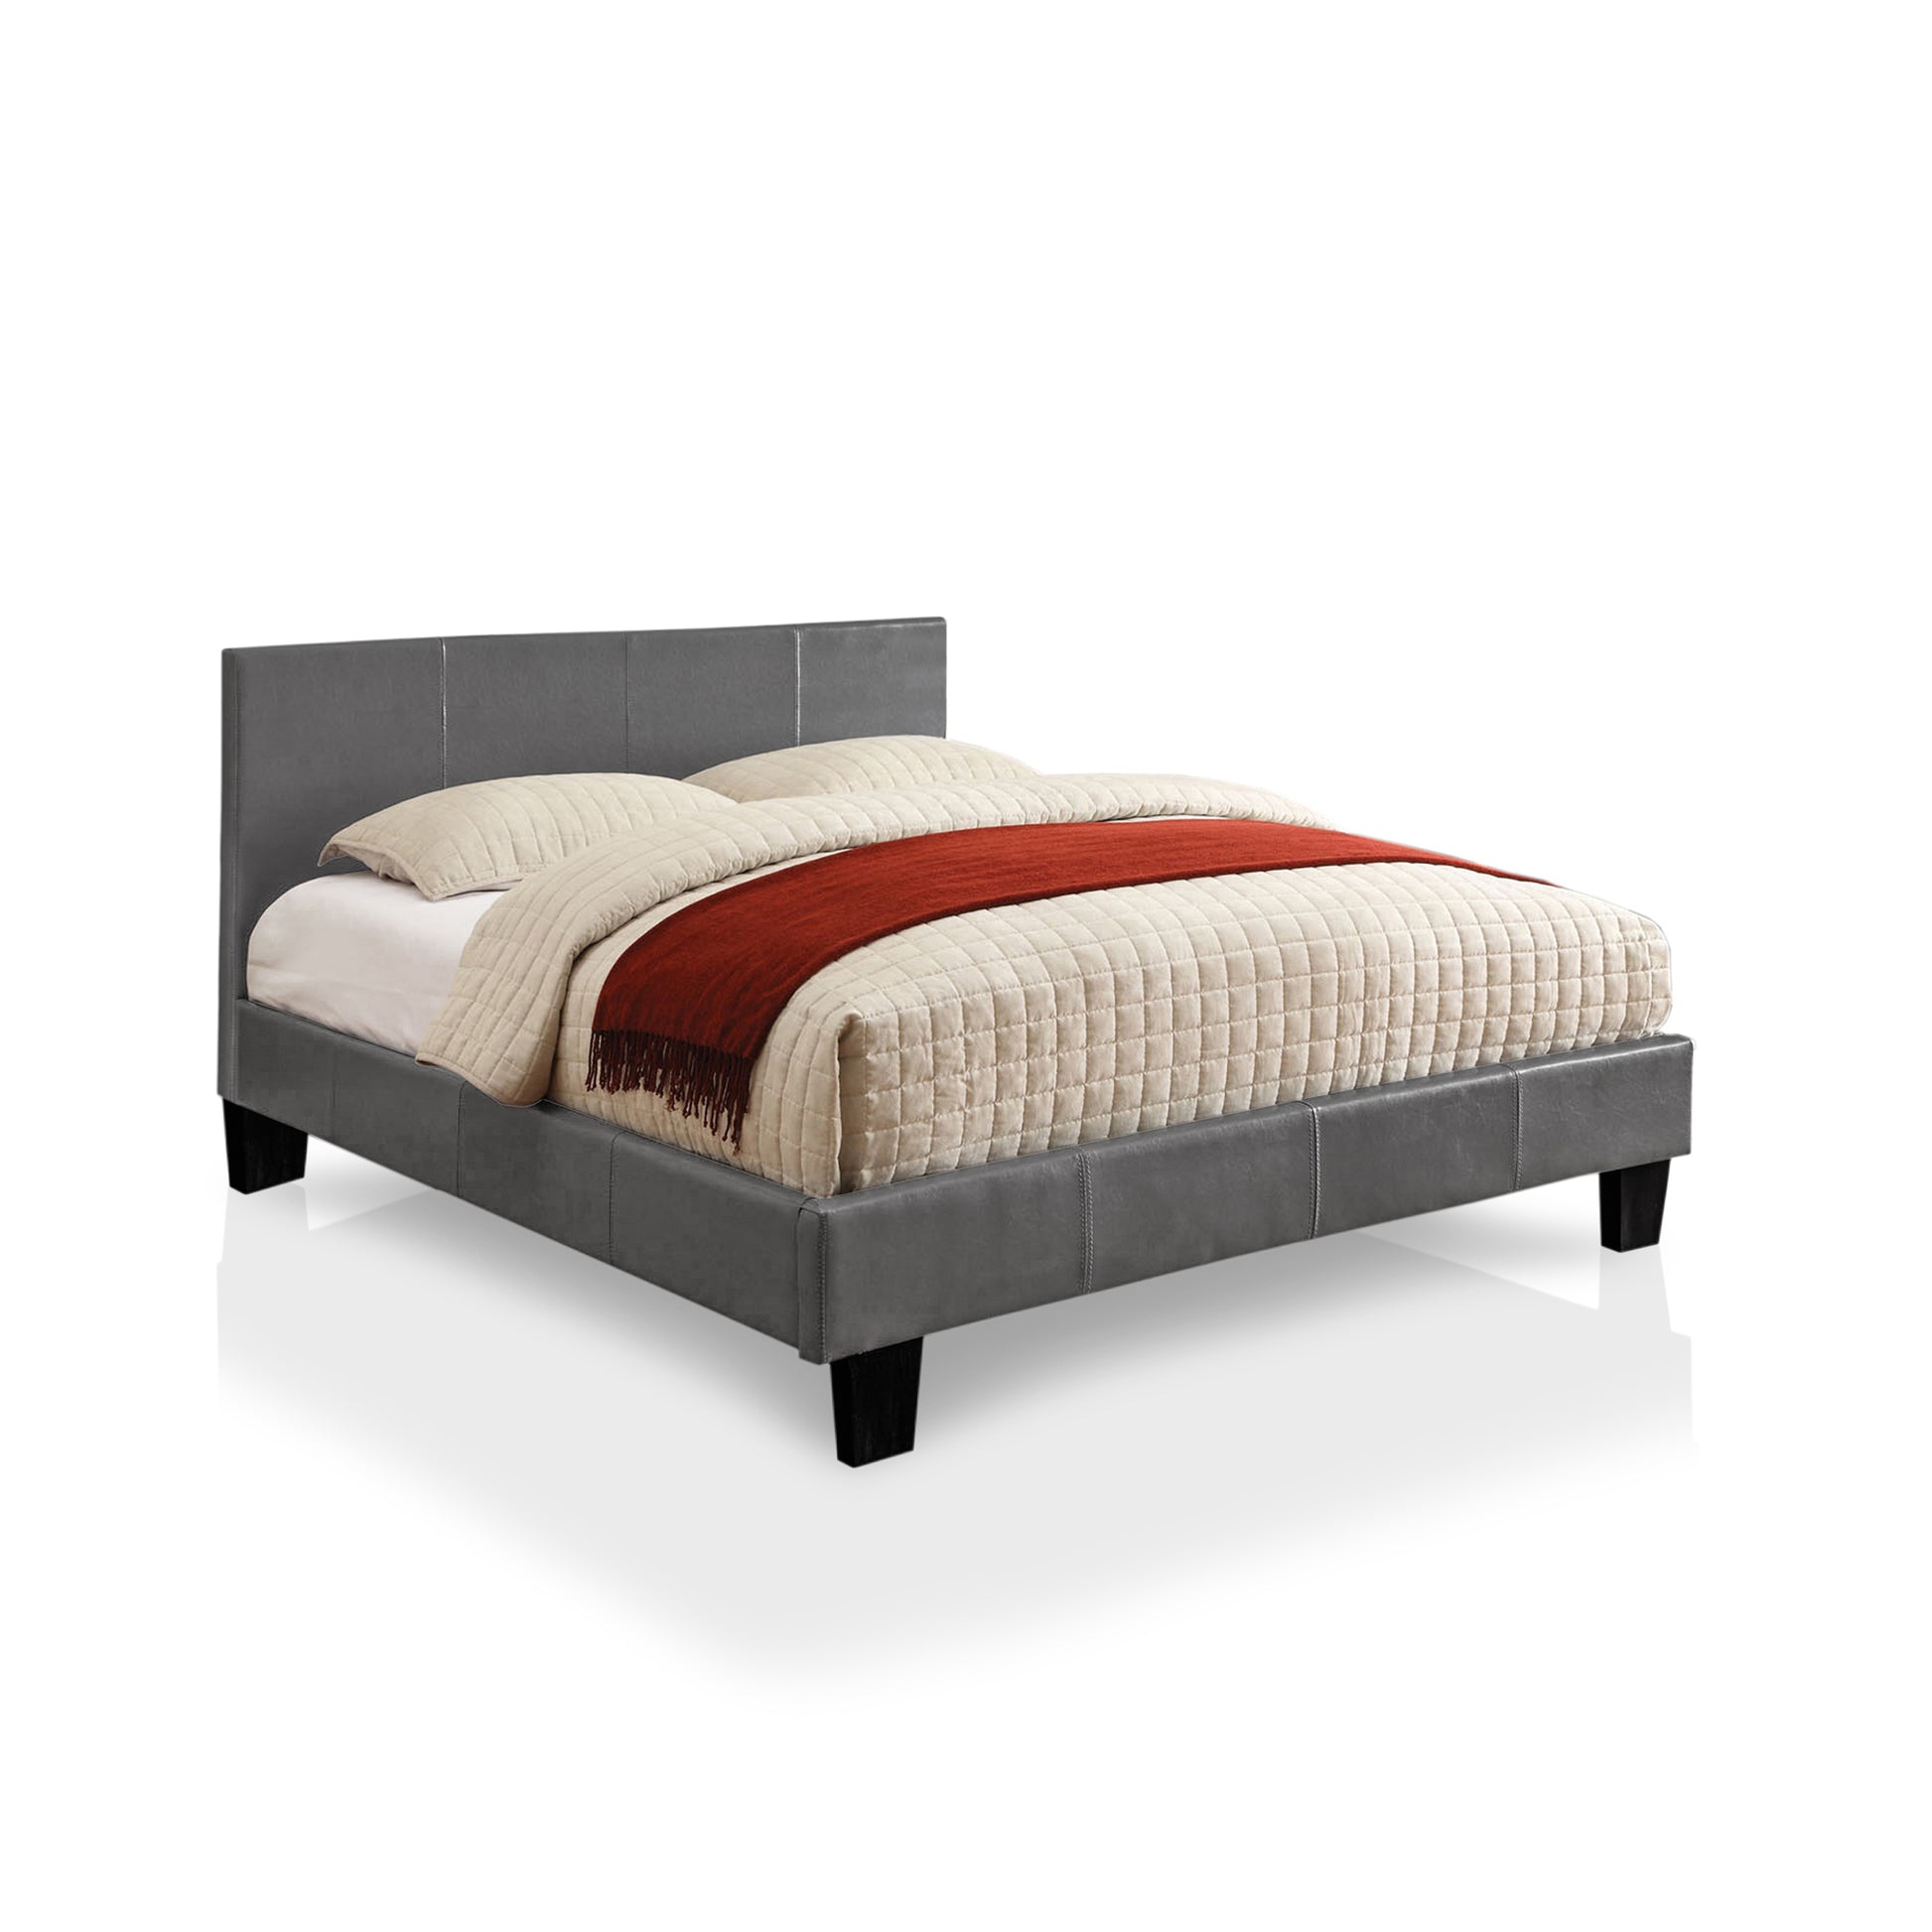 Right angled contemporary gray faux leather full platform bed with linens on a white background